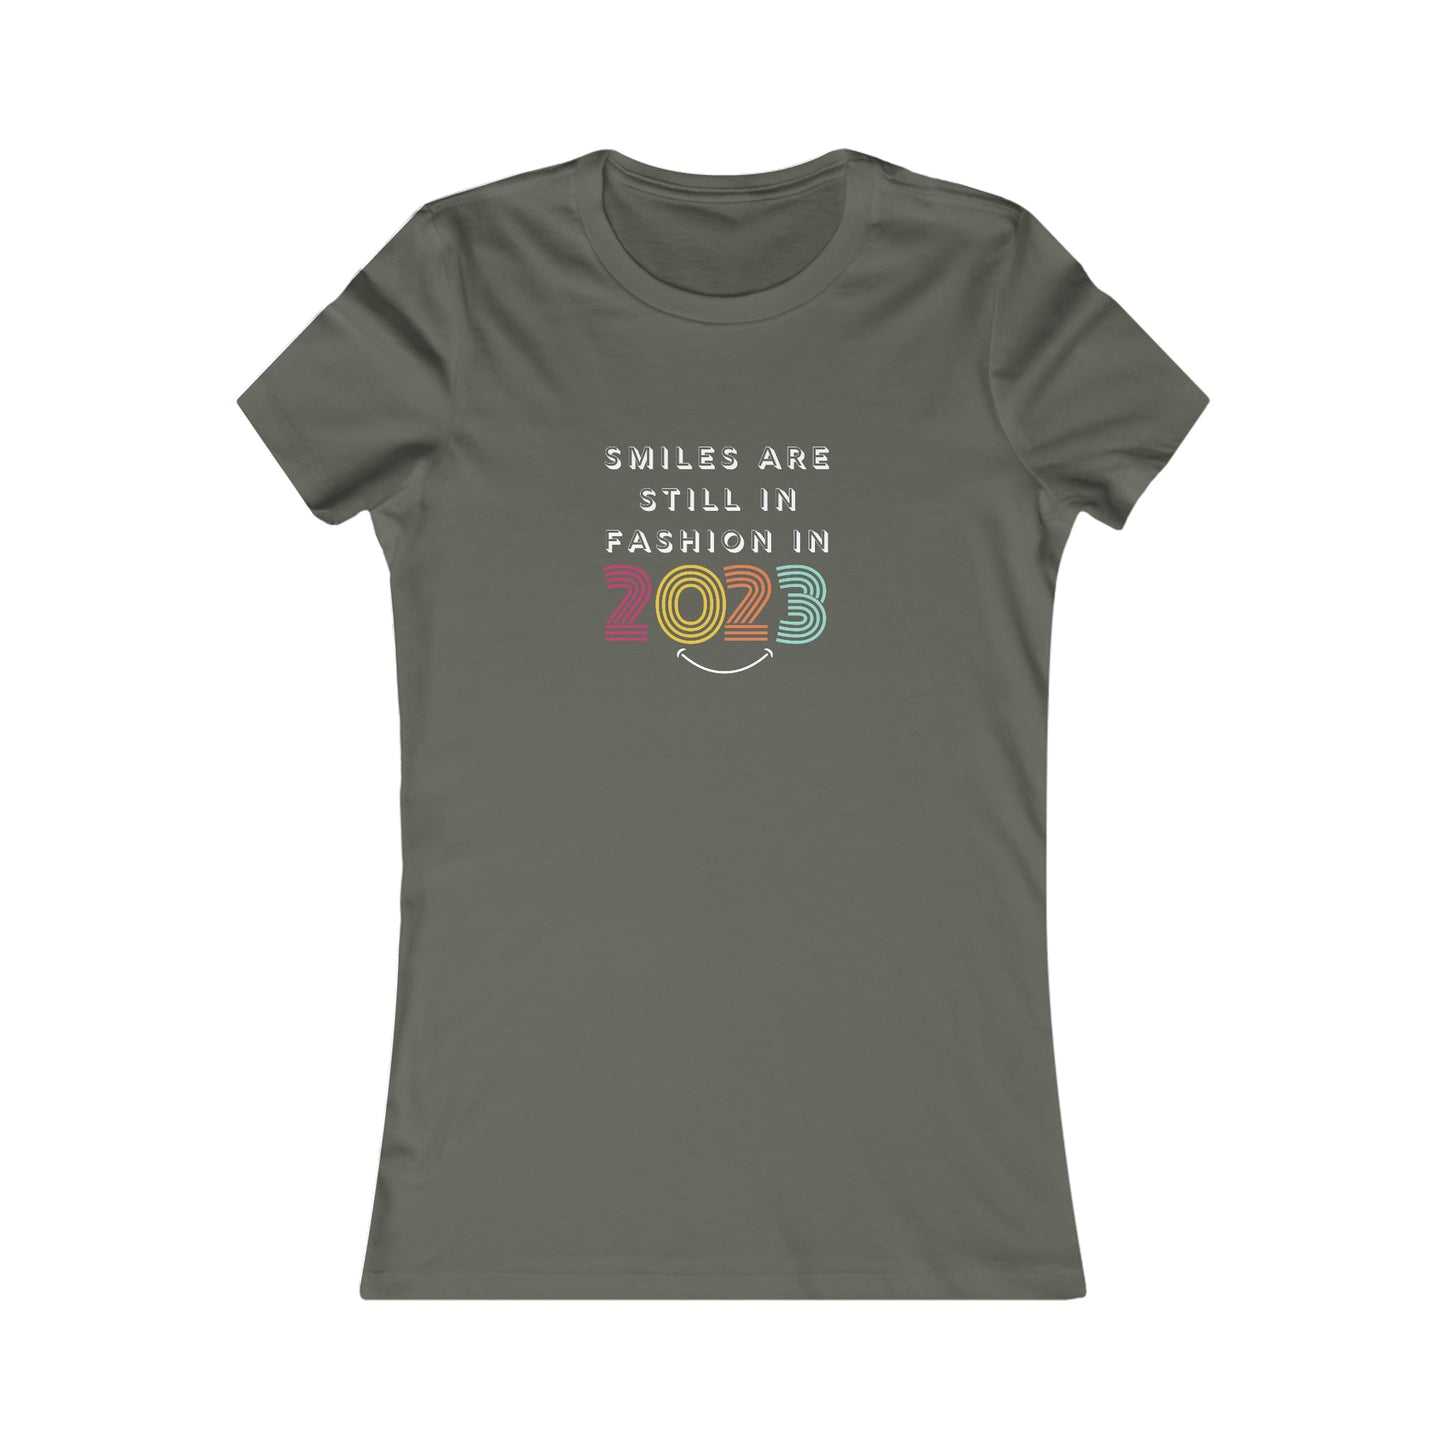 'Smiles Are Still In Fashion In 2023' Women's Luxe Slim Tee